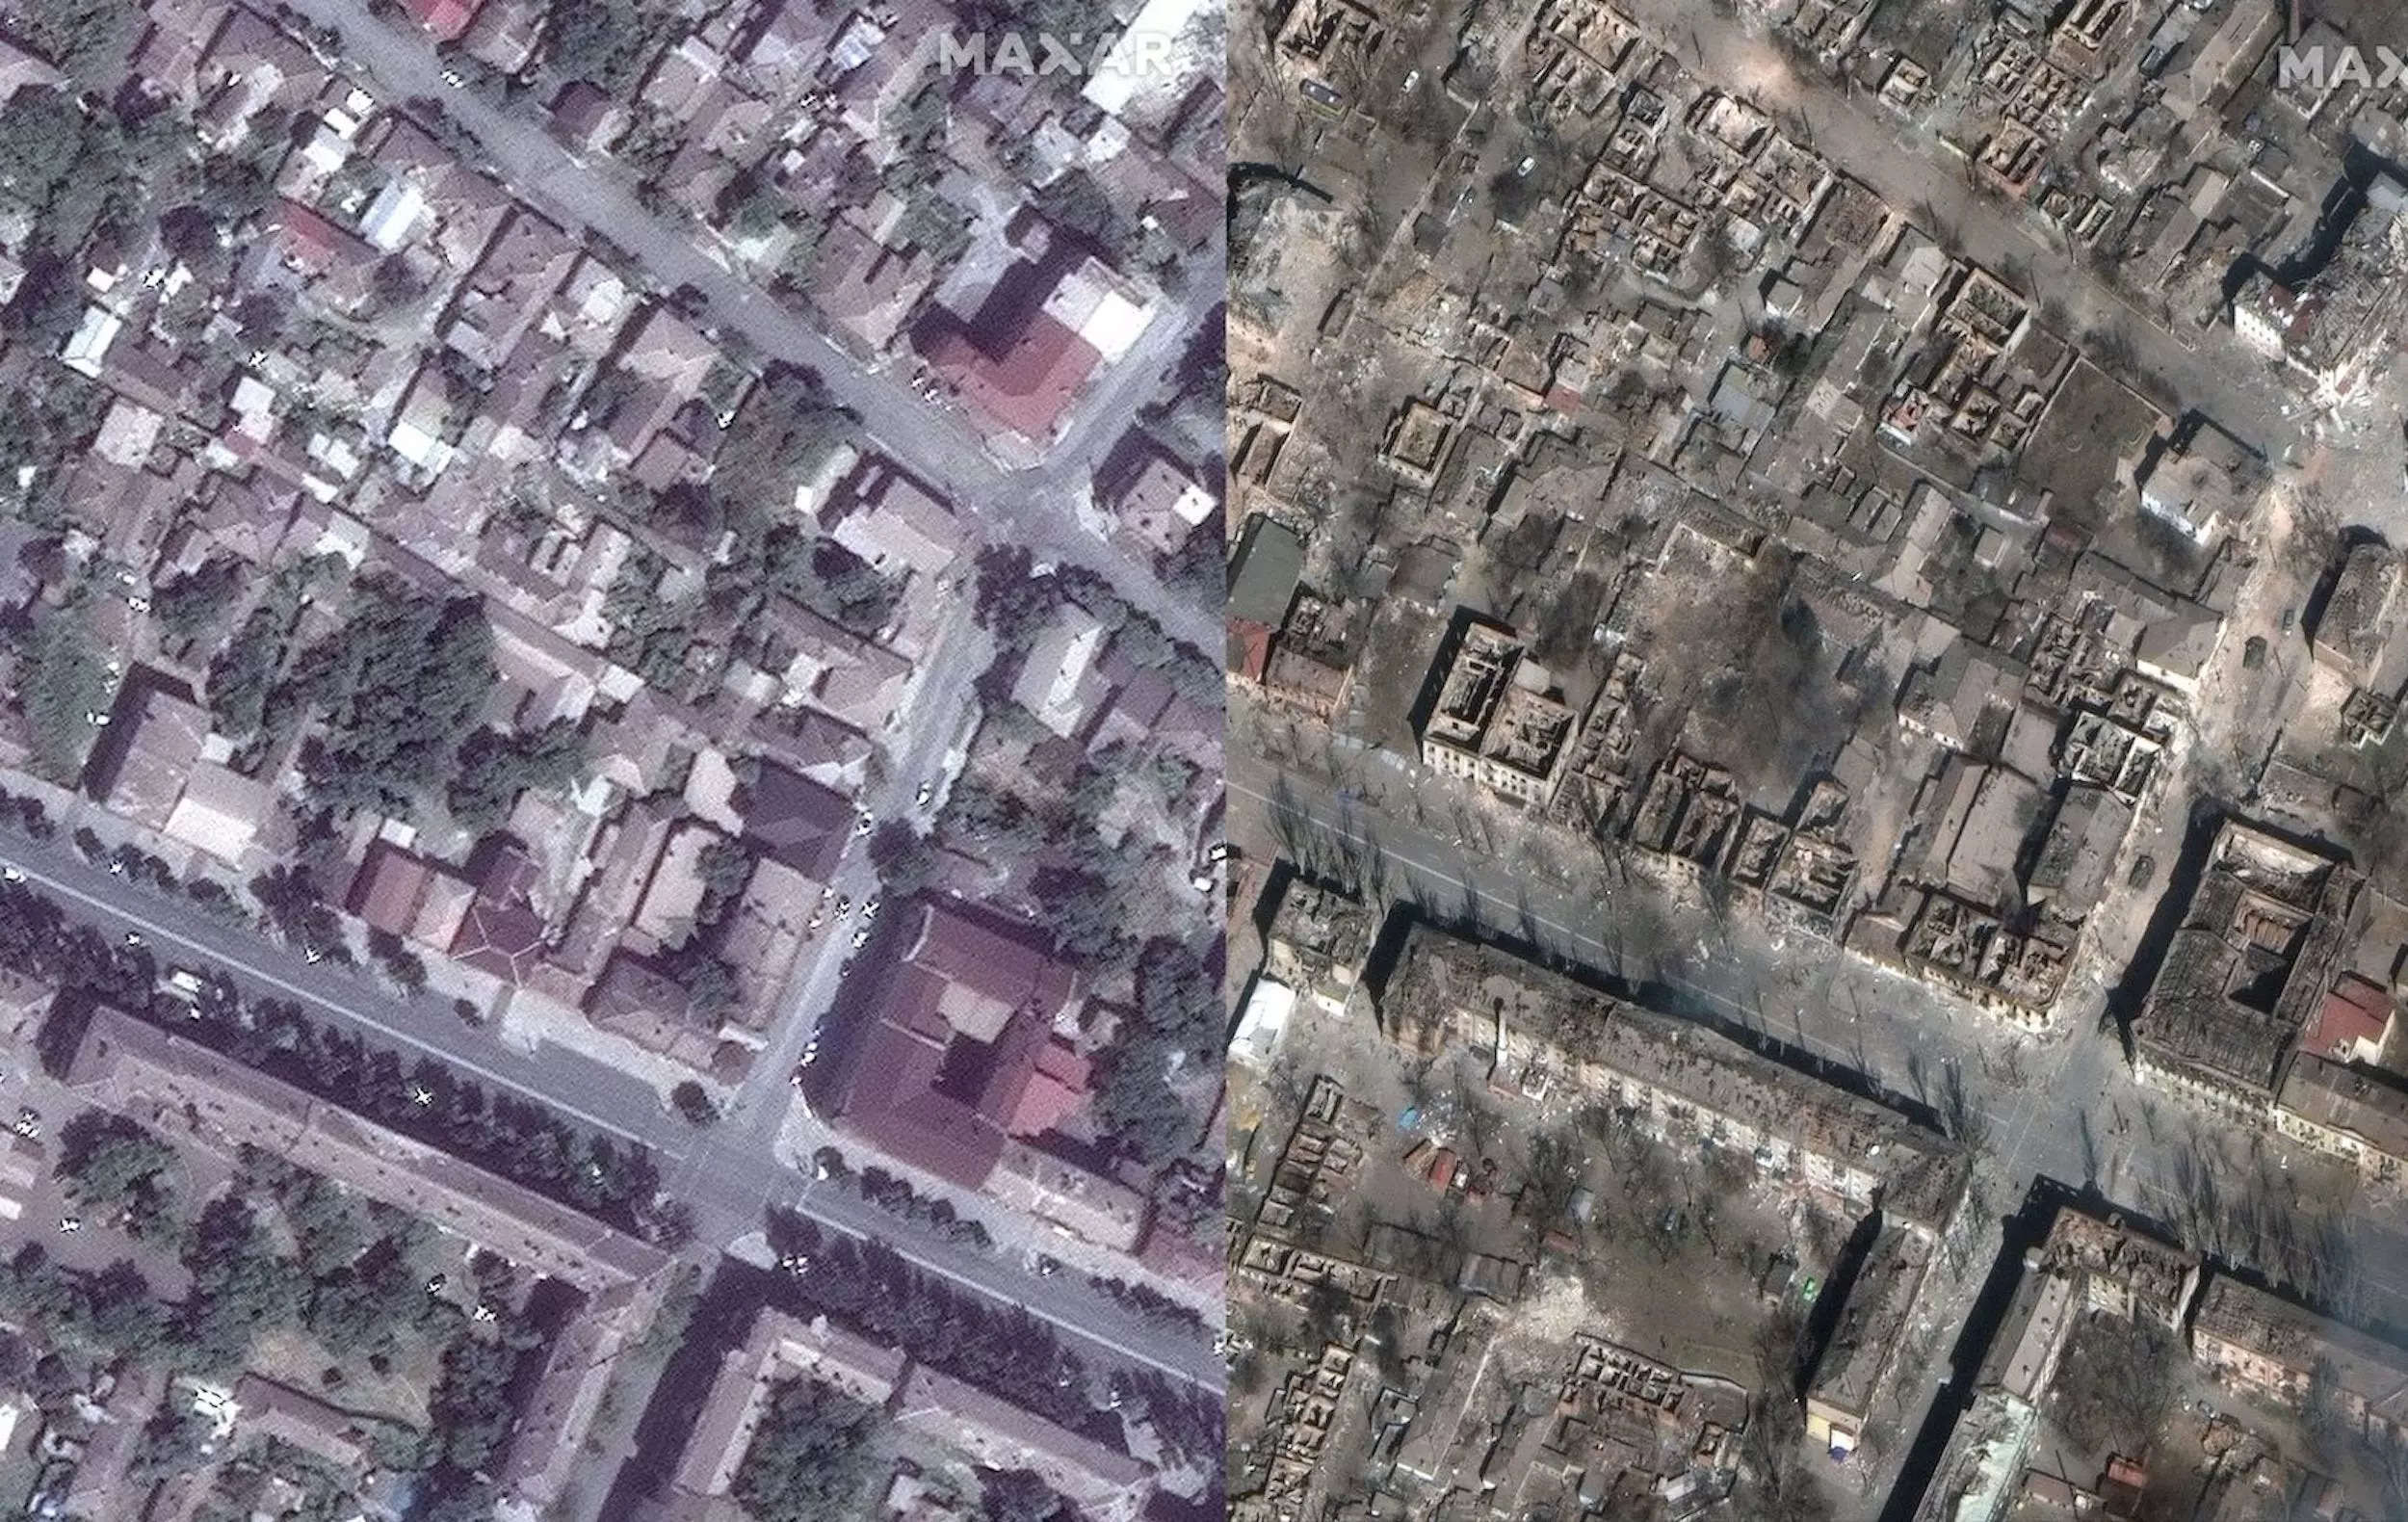 Before and after imagery showing residential damage to Mariupol